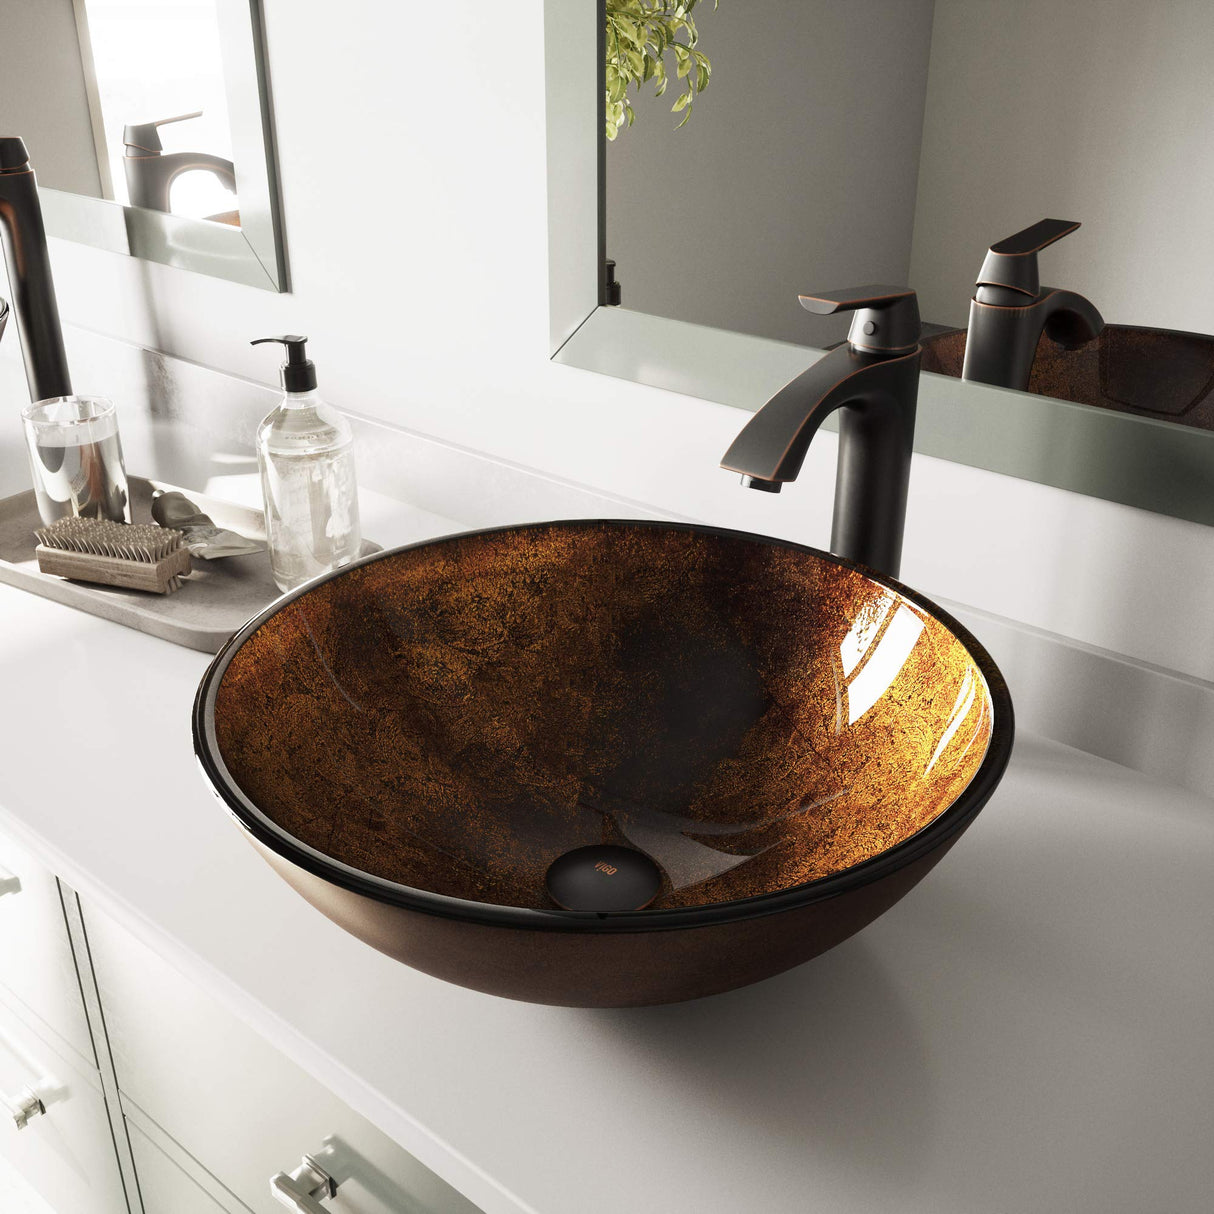 VIGO VGT504 16.5" L -16.5" W -12.38" H Handmade Countertop Glass Round Vessel Bathroom Sink Set in Gold and Brown Fusion Finish with Antique Rubbed Bronze Single-Handle Faucet and Pop Up Drain